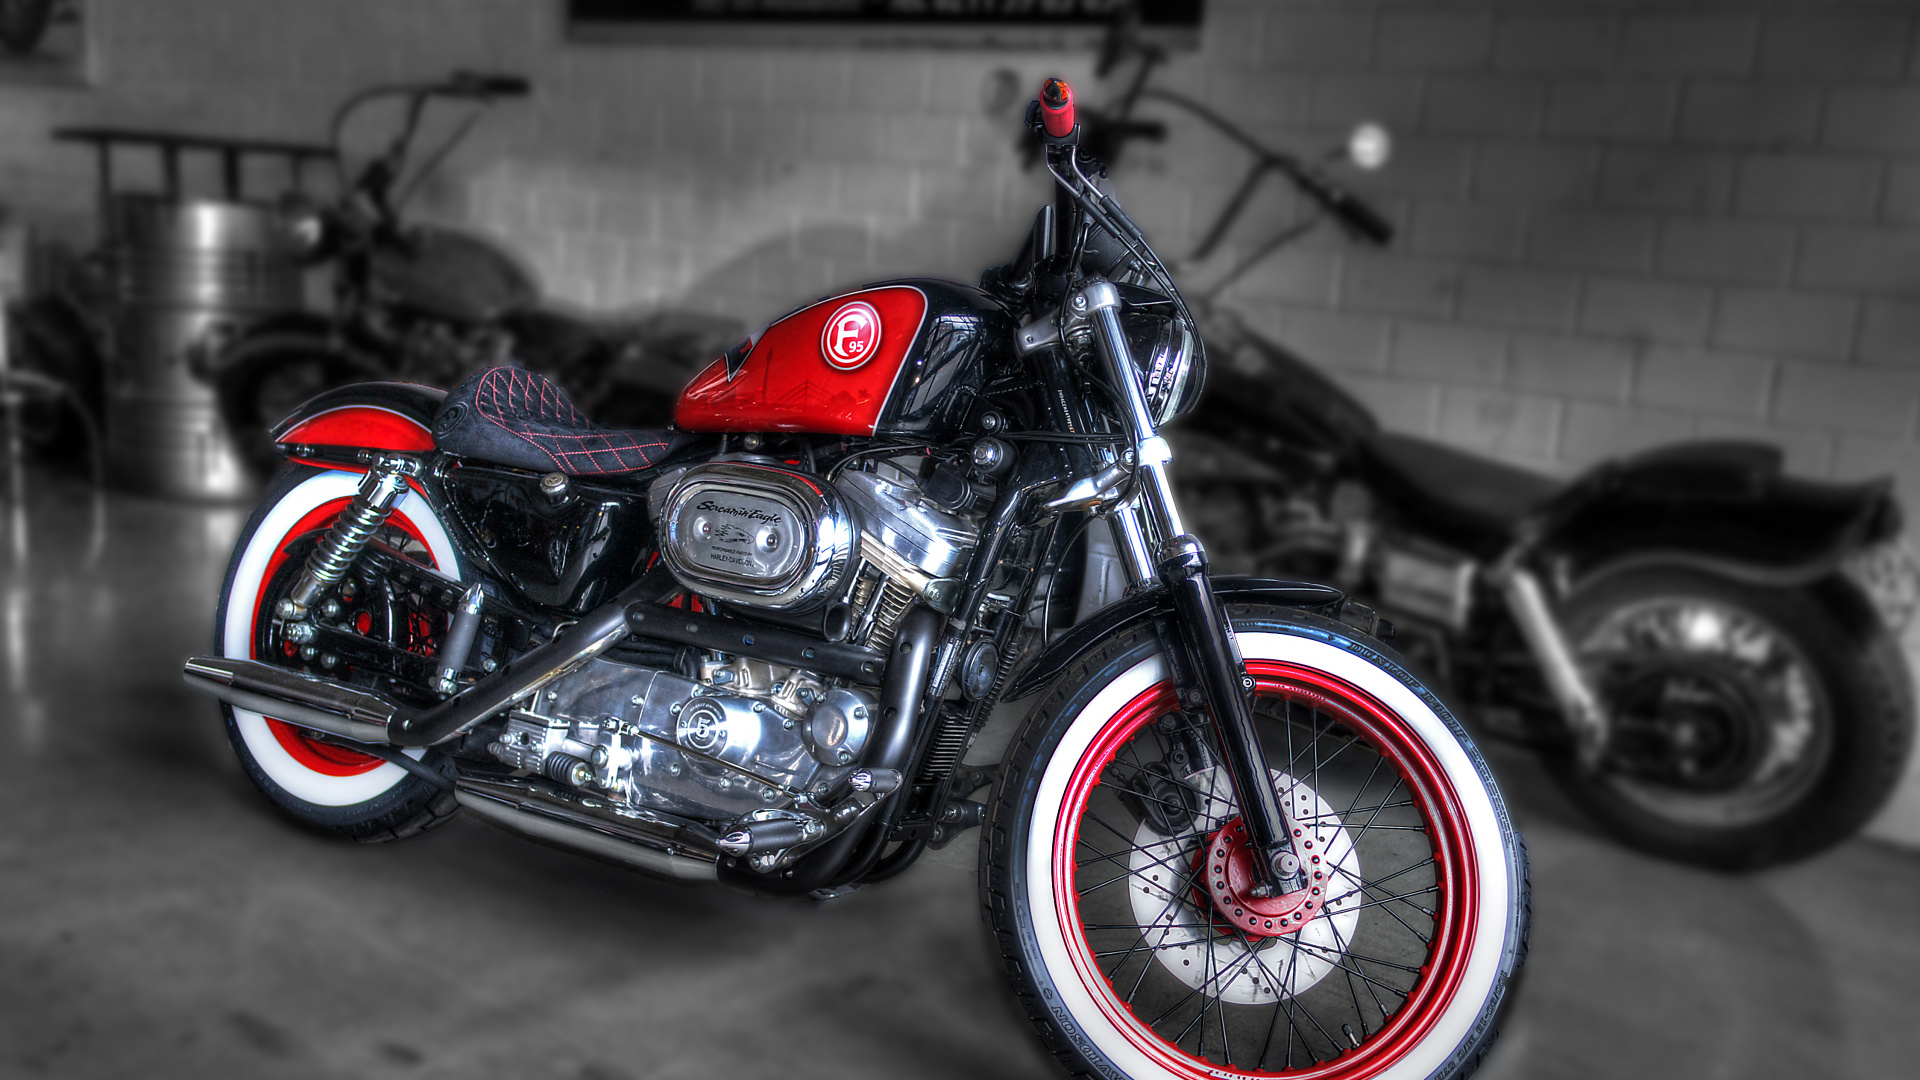 Red and Black Cruiser Motorcycle. Wallpaper in 1920x1080 Resolution